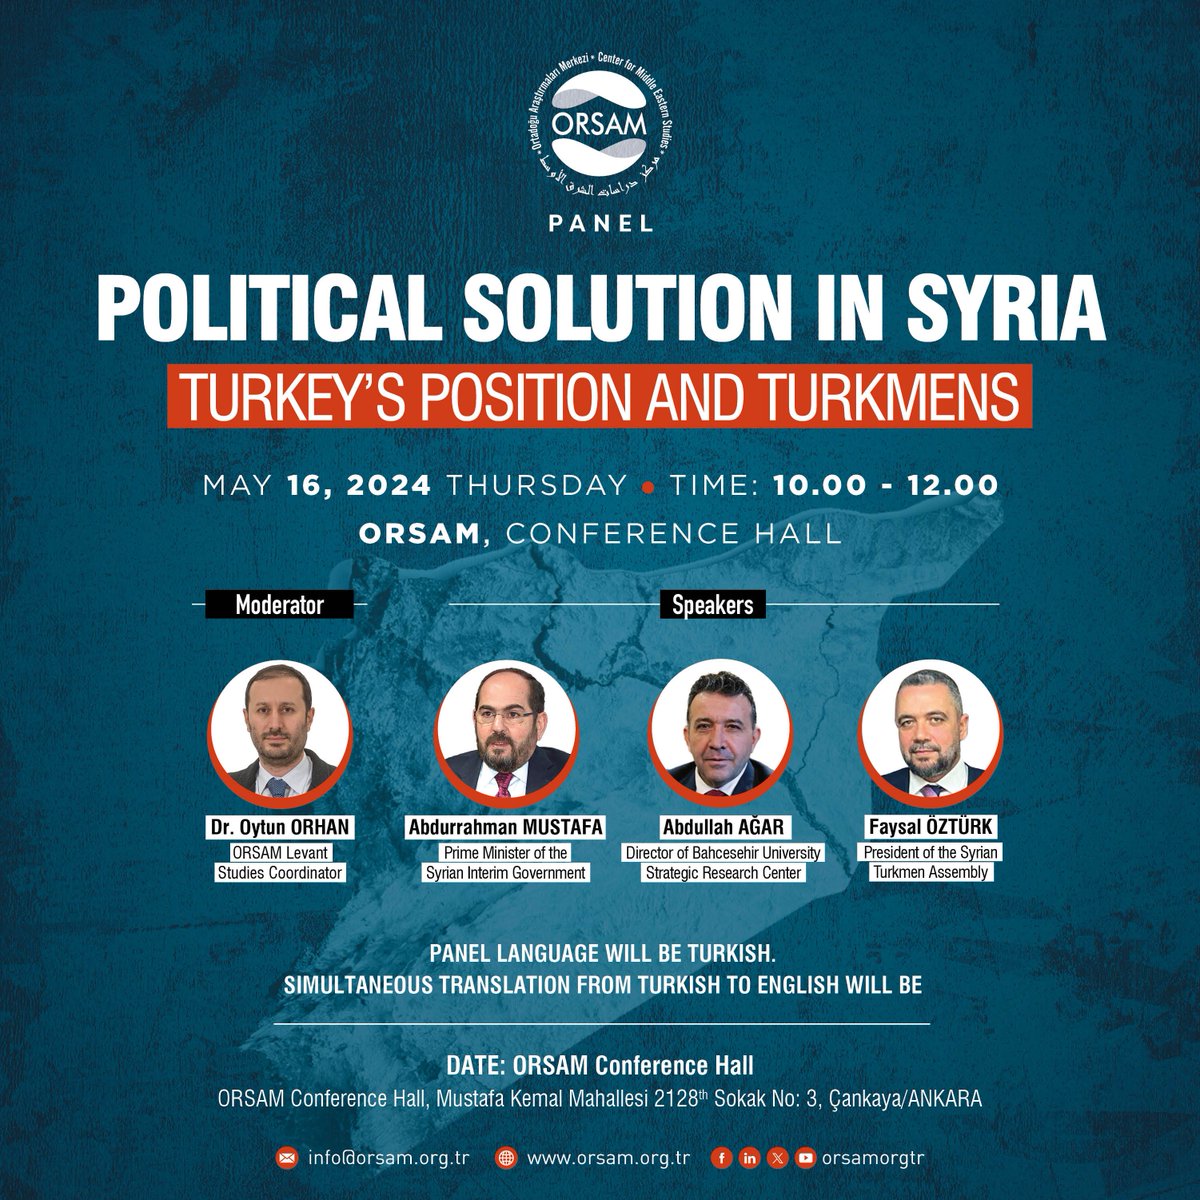 ORSAM Panel | Political Solution in Syria, Turkey's Position and Turkmens Date: 16 May, 2024, Thursday Time: 10:00 - 12:00 Location: ORSAM Conference Hall Language: Panel language will be Turkish. Simultaneous translation from Turkish to English will be provided. For detailed